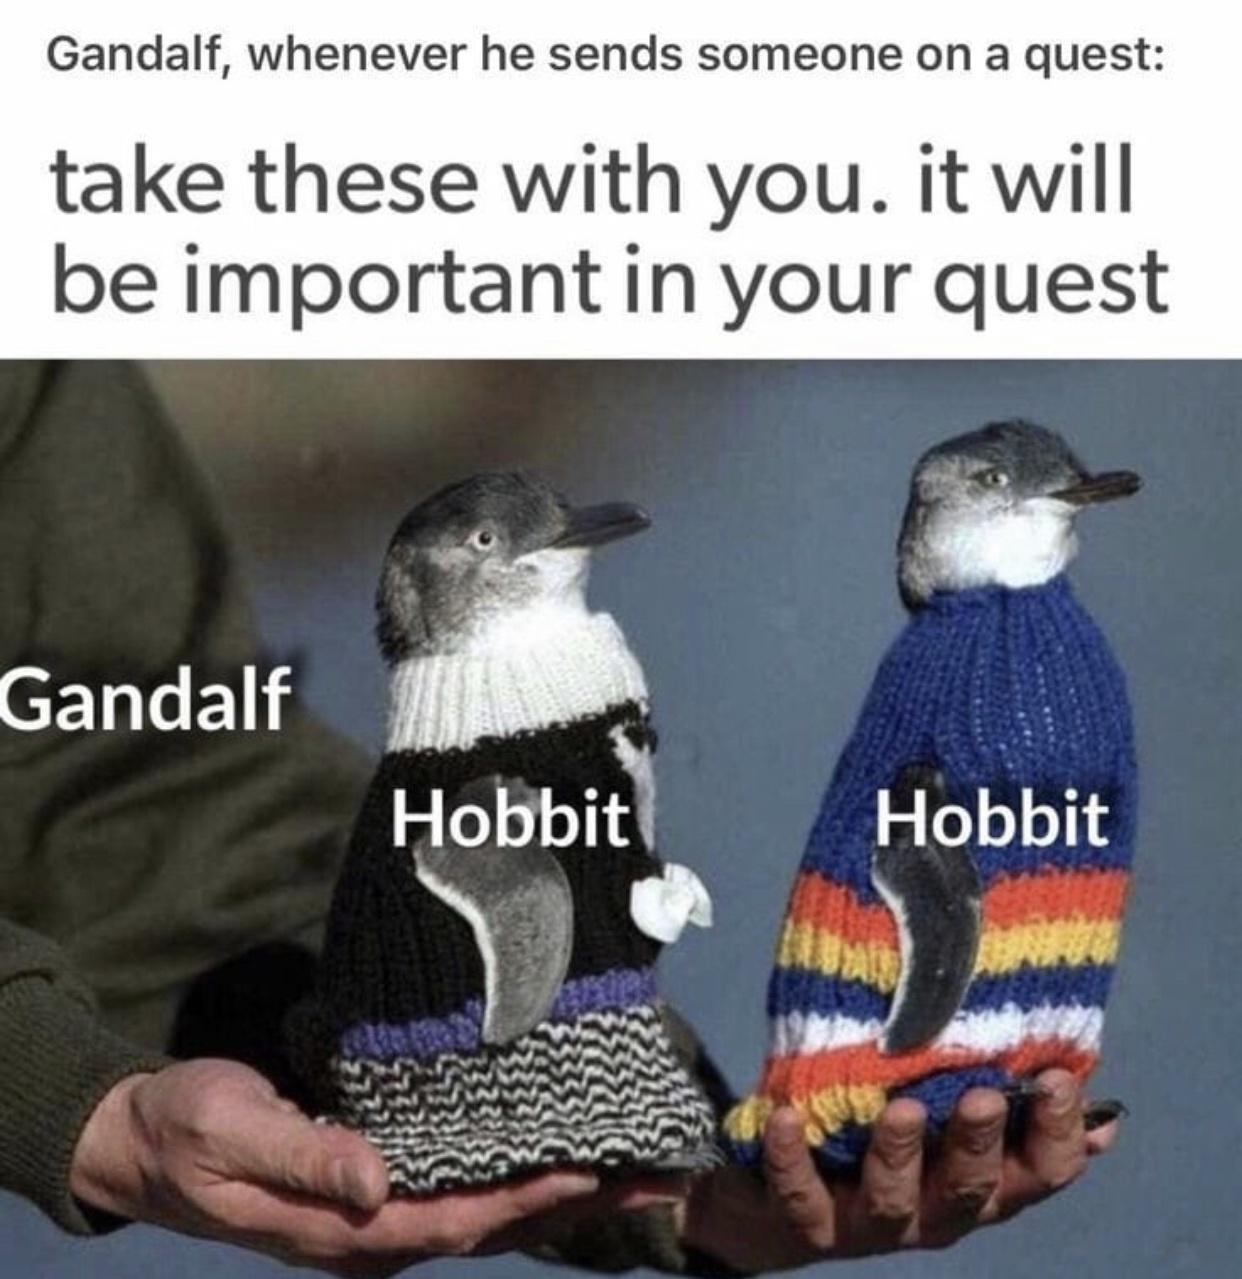 funny memes - australia's oldest man knits sweaters for penguins - Gandalf, whenever he sends someone on a quest take these with you. it will be important in your quest Gandalf Hobbit Hobbit